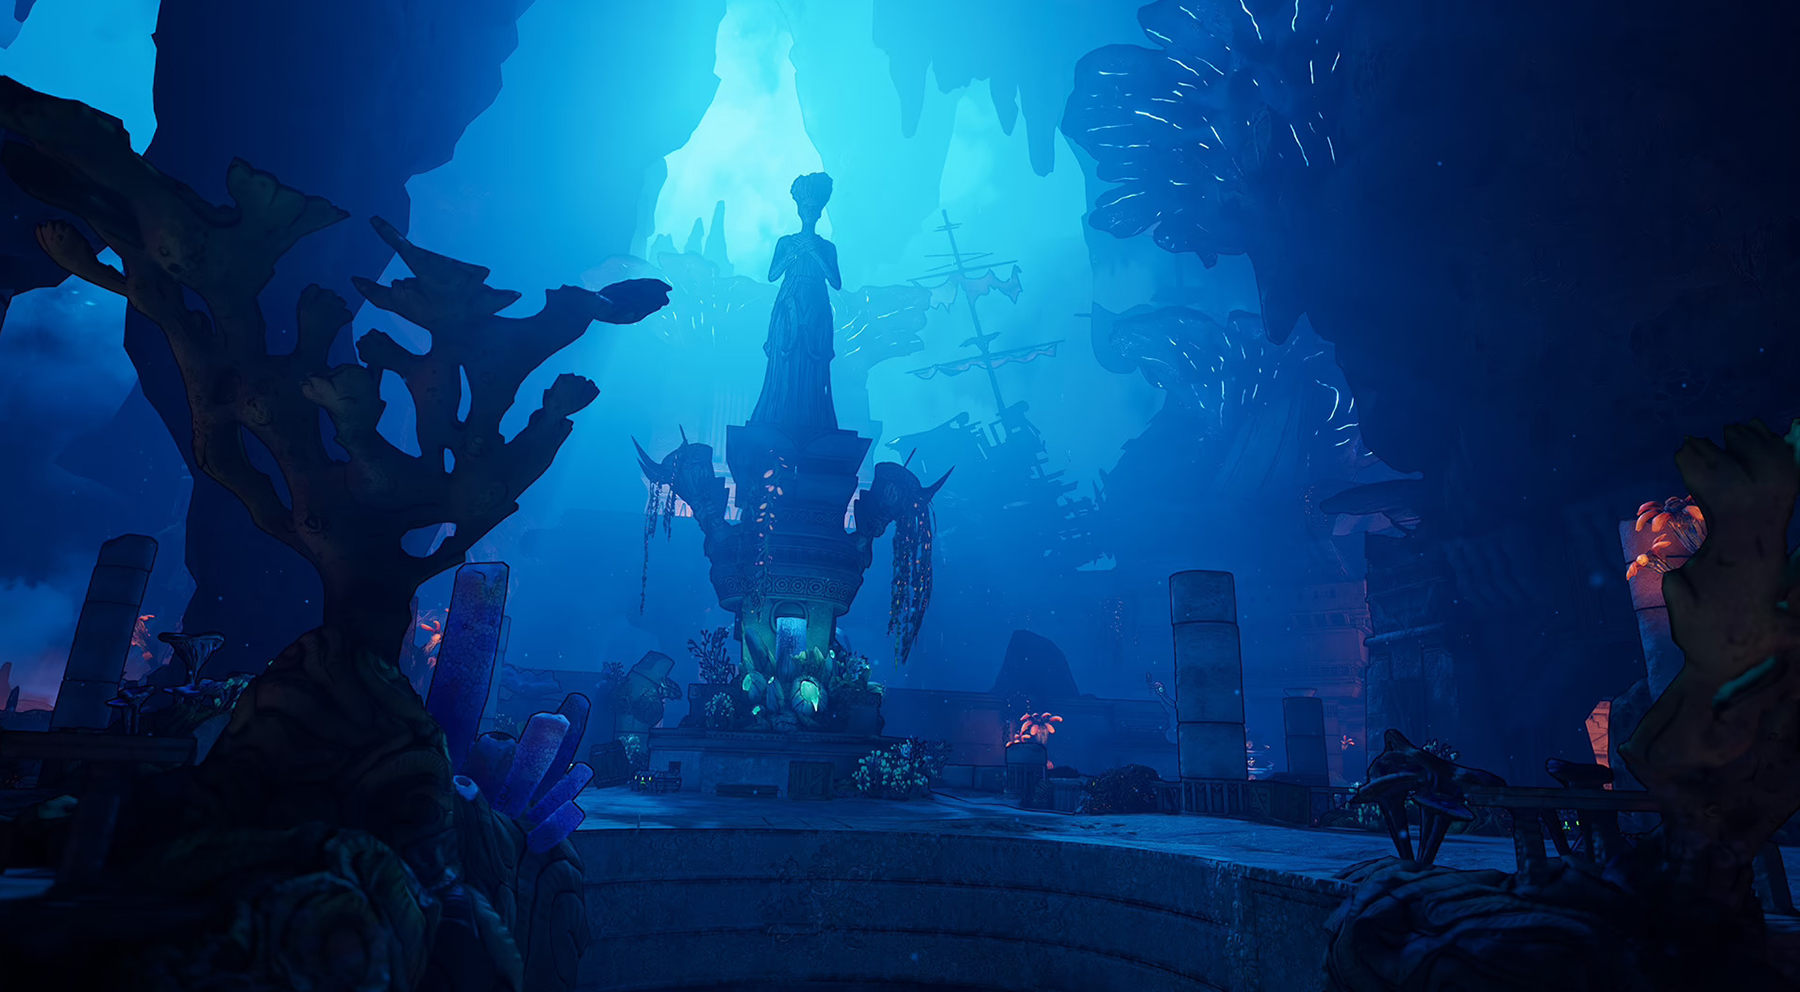 An underwater game level with a statue and coral, bathed in eerie blue light.